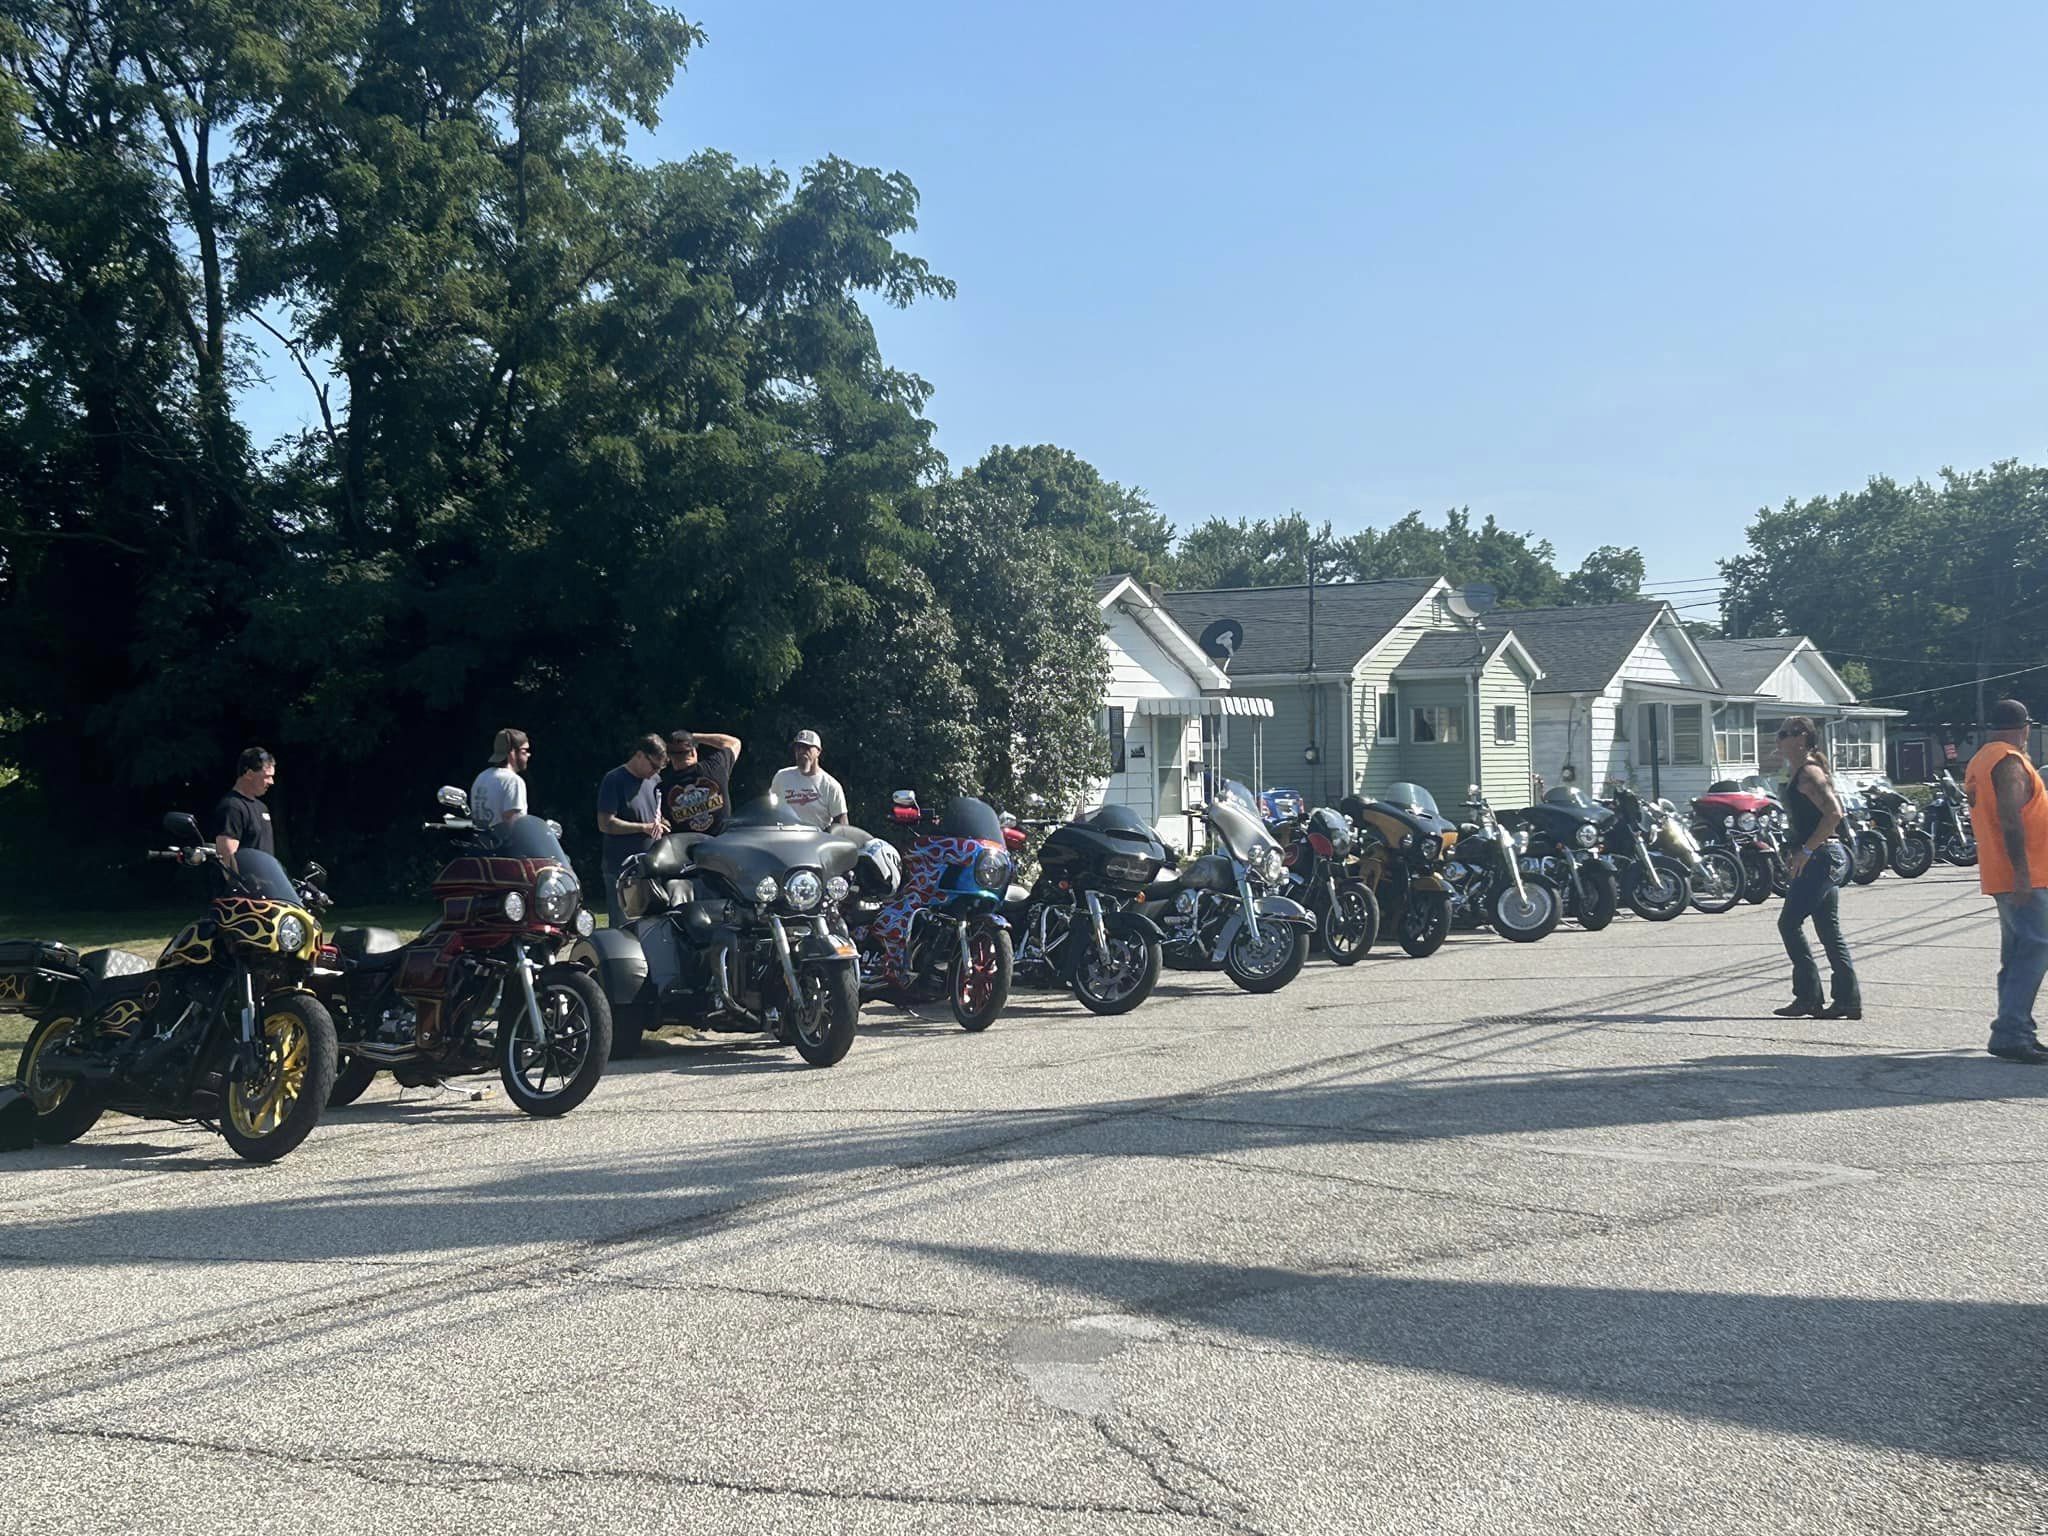 Hundreds of Bikers Participant in Cpl. King Memorial Ride